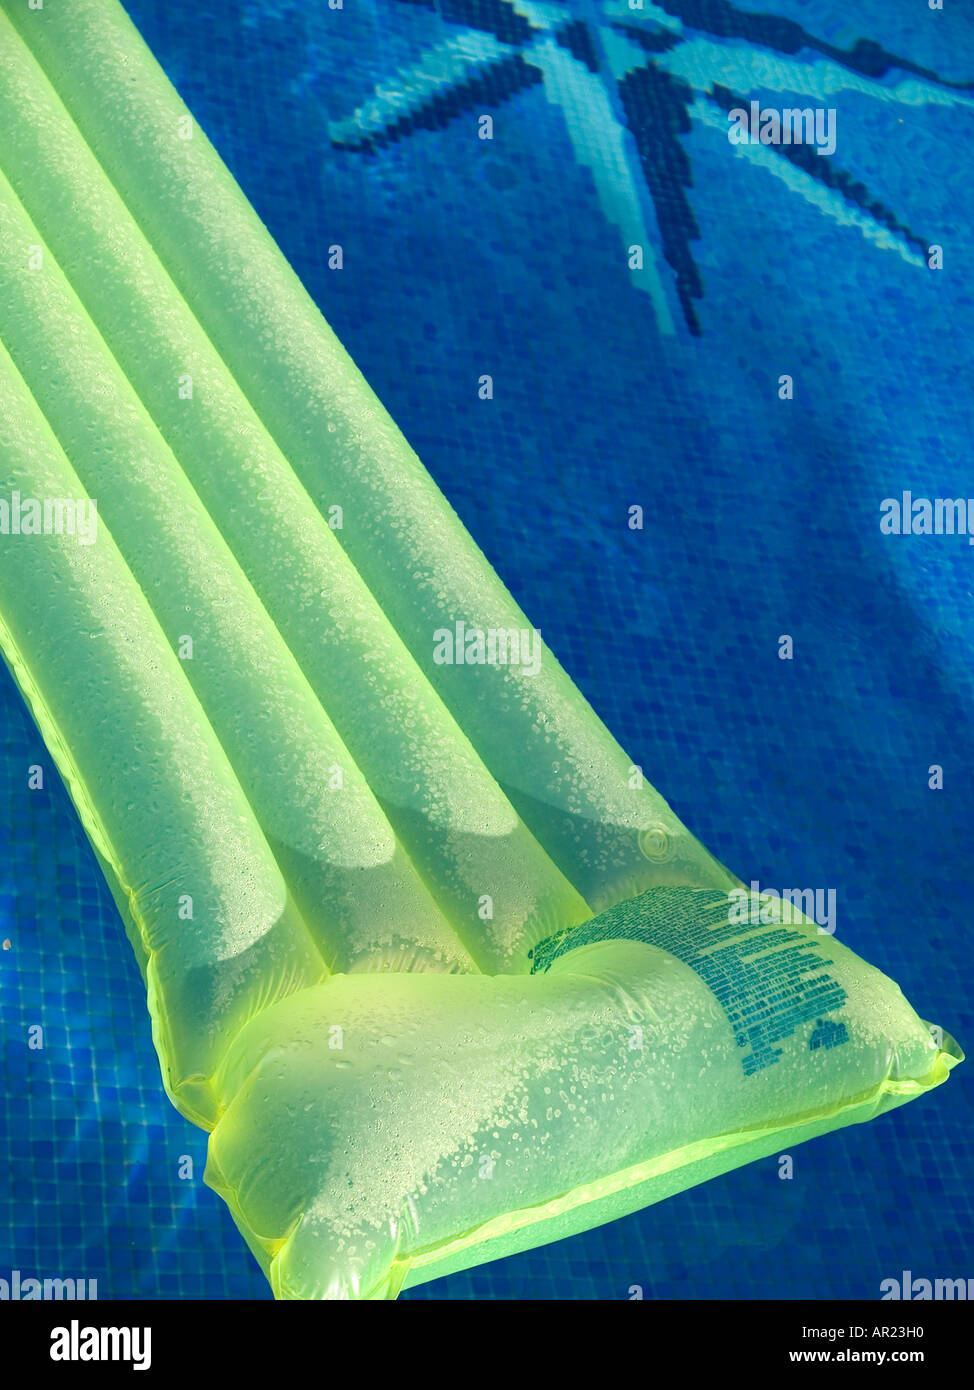 Yellow green inflatable lilo in blue tiled swimming pool Stock Photo